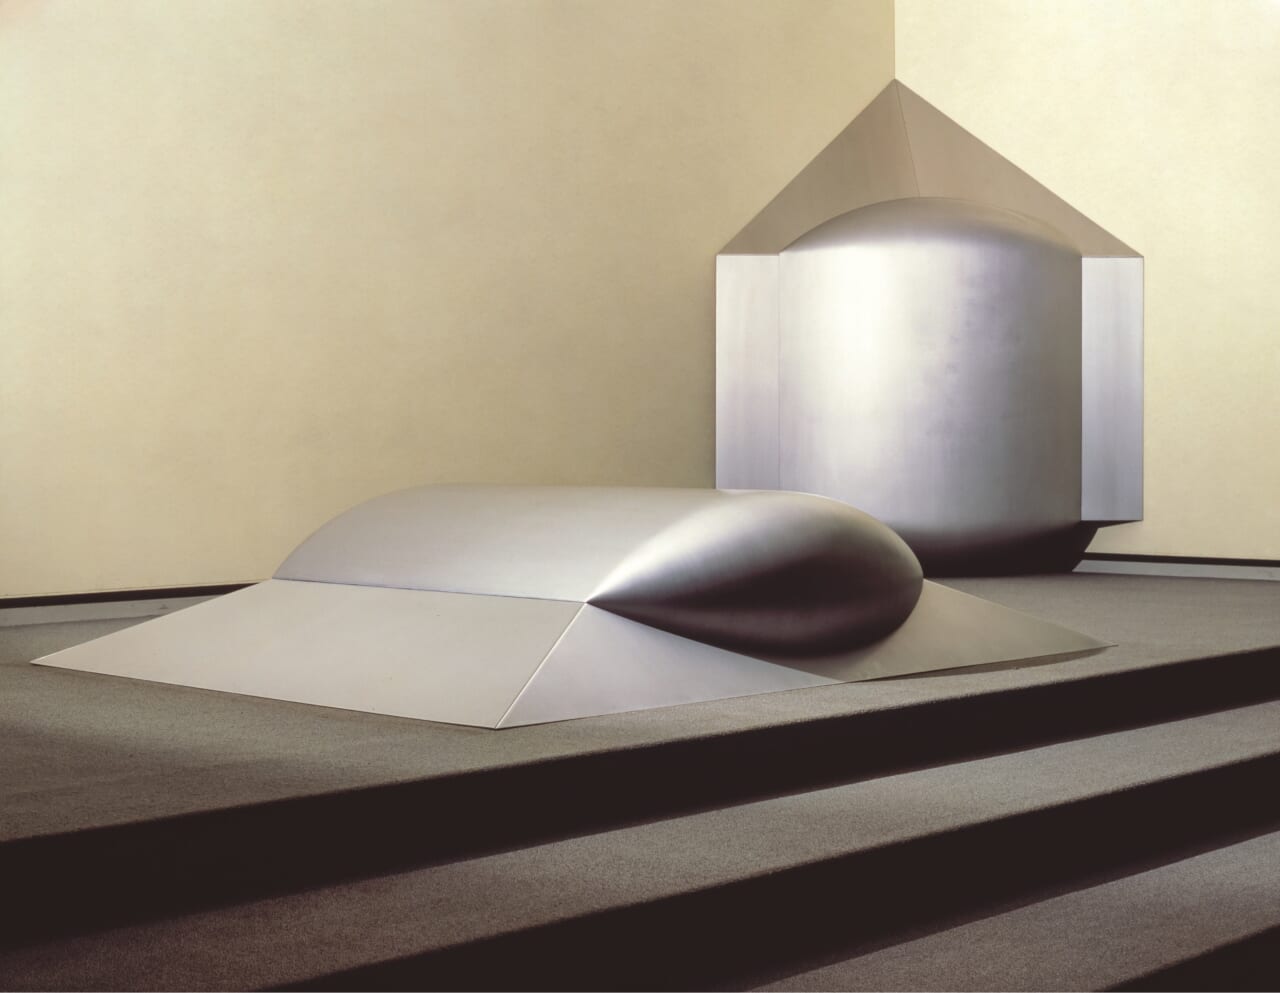 Continuation of AFFINITY, 1976 Collection of the Mori Art Museum of Sculpture